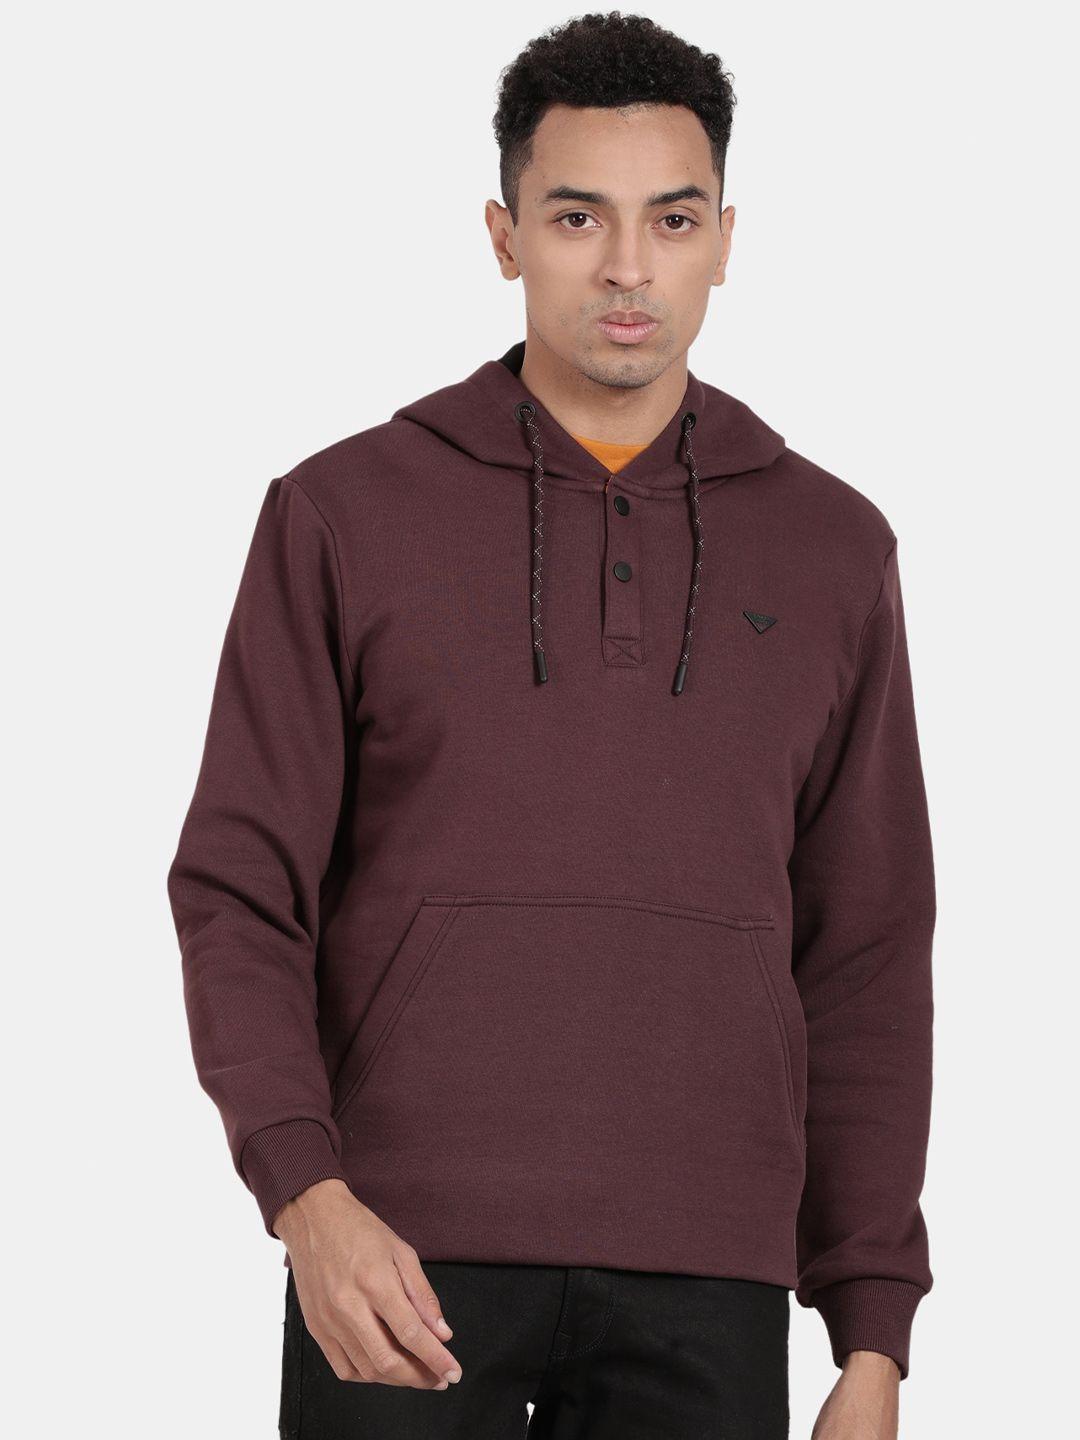 t-base-long-sleeves-hooded-pullover